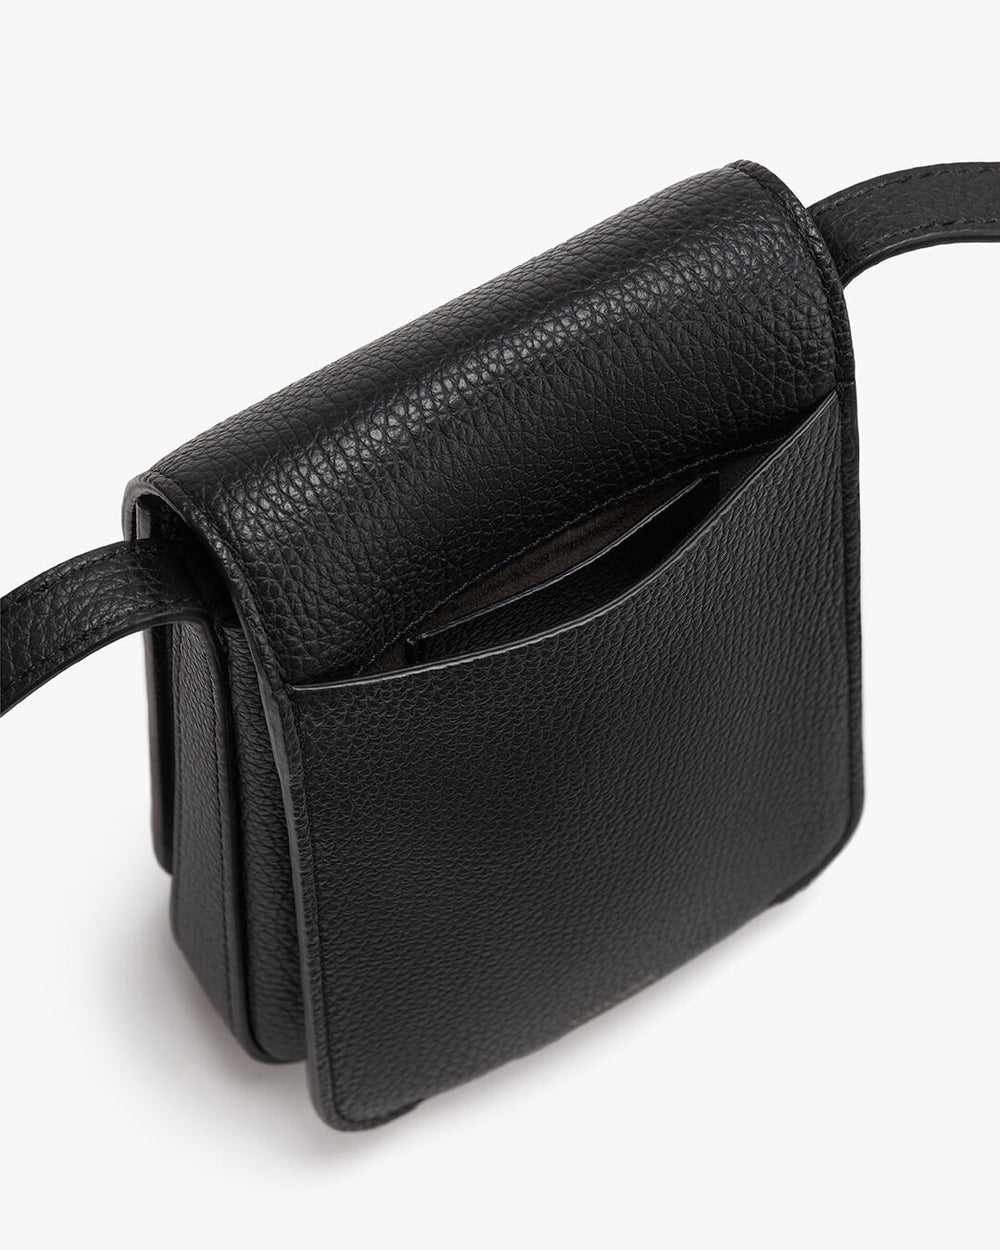 Small black shoulder bag with a textured surface